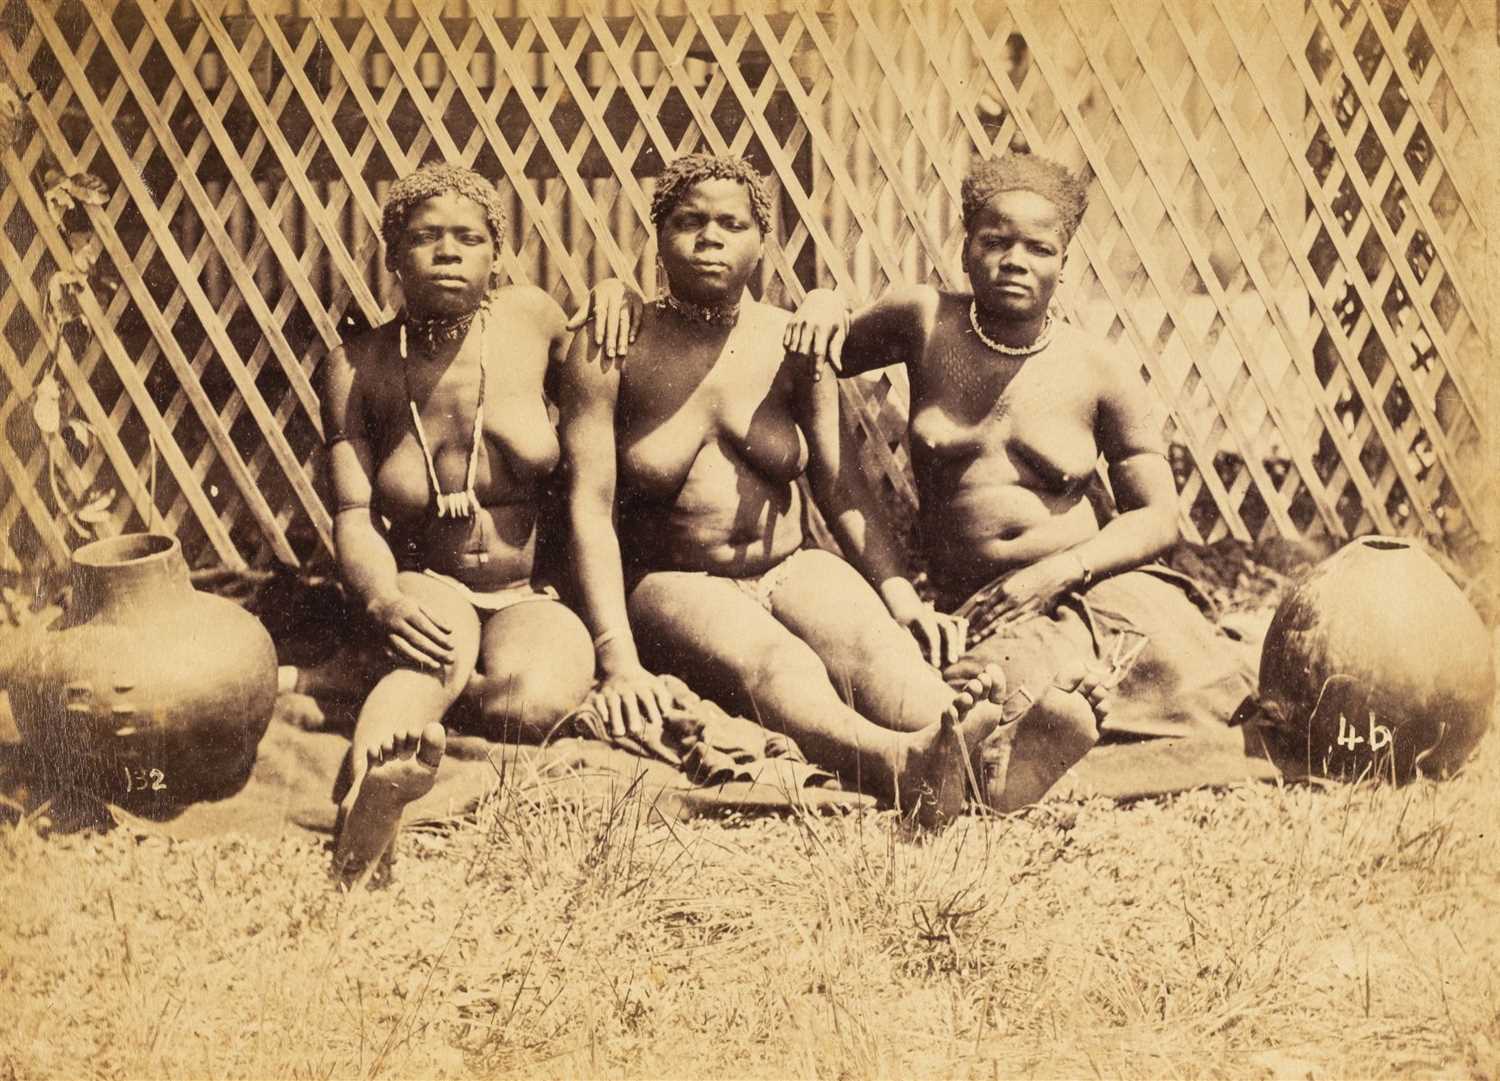 Lot 23 - South Africa. Three 'maiden beer carriers, Natal', c. 1890s